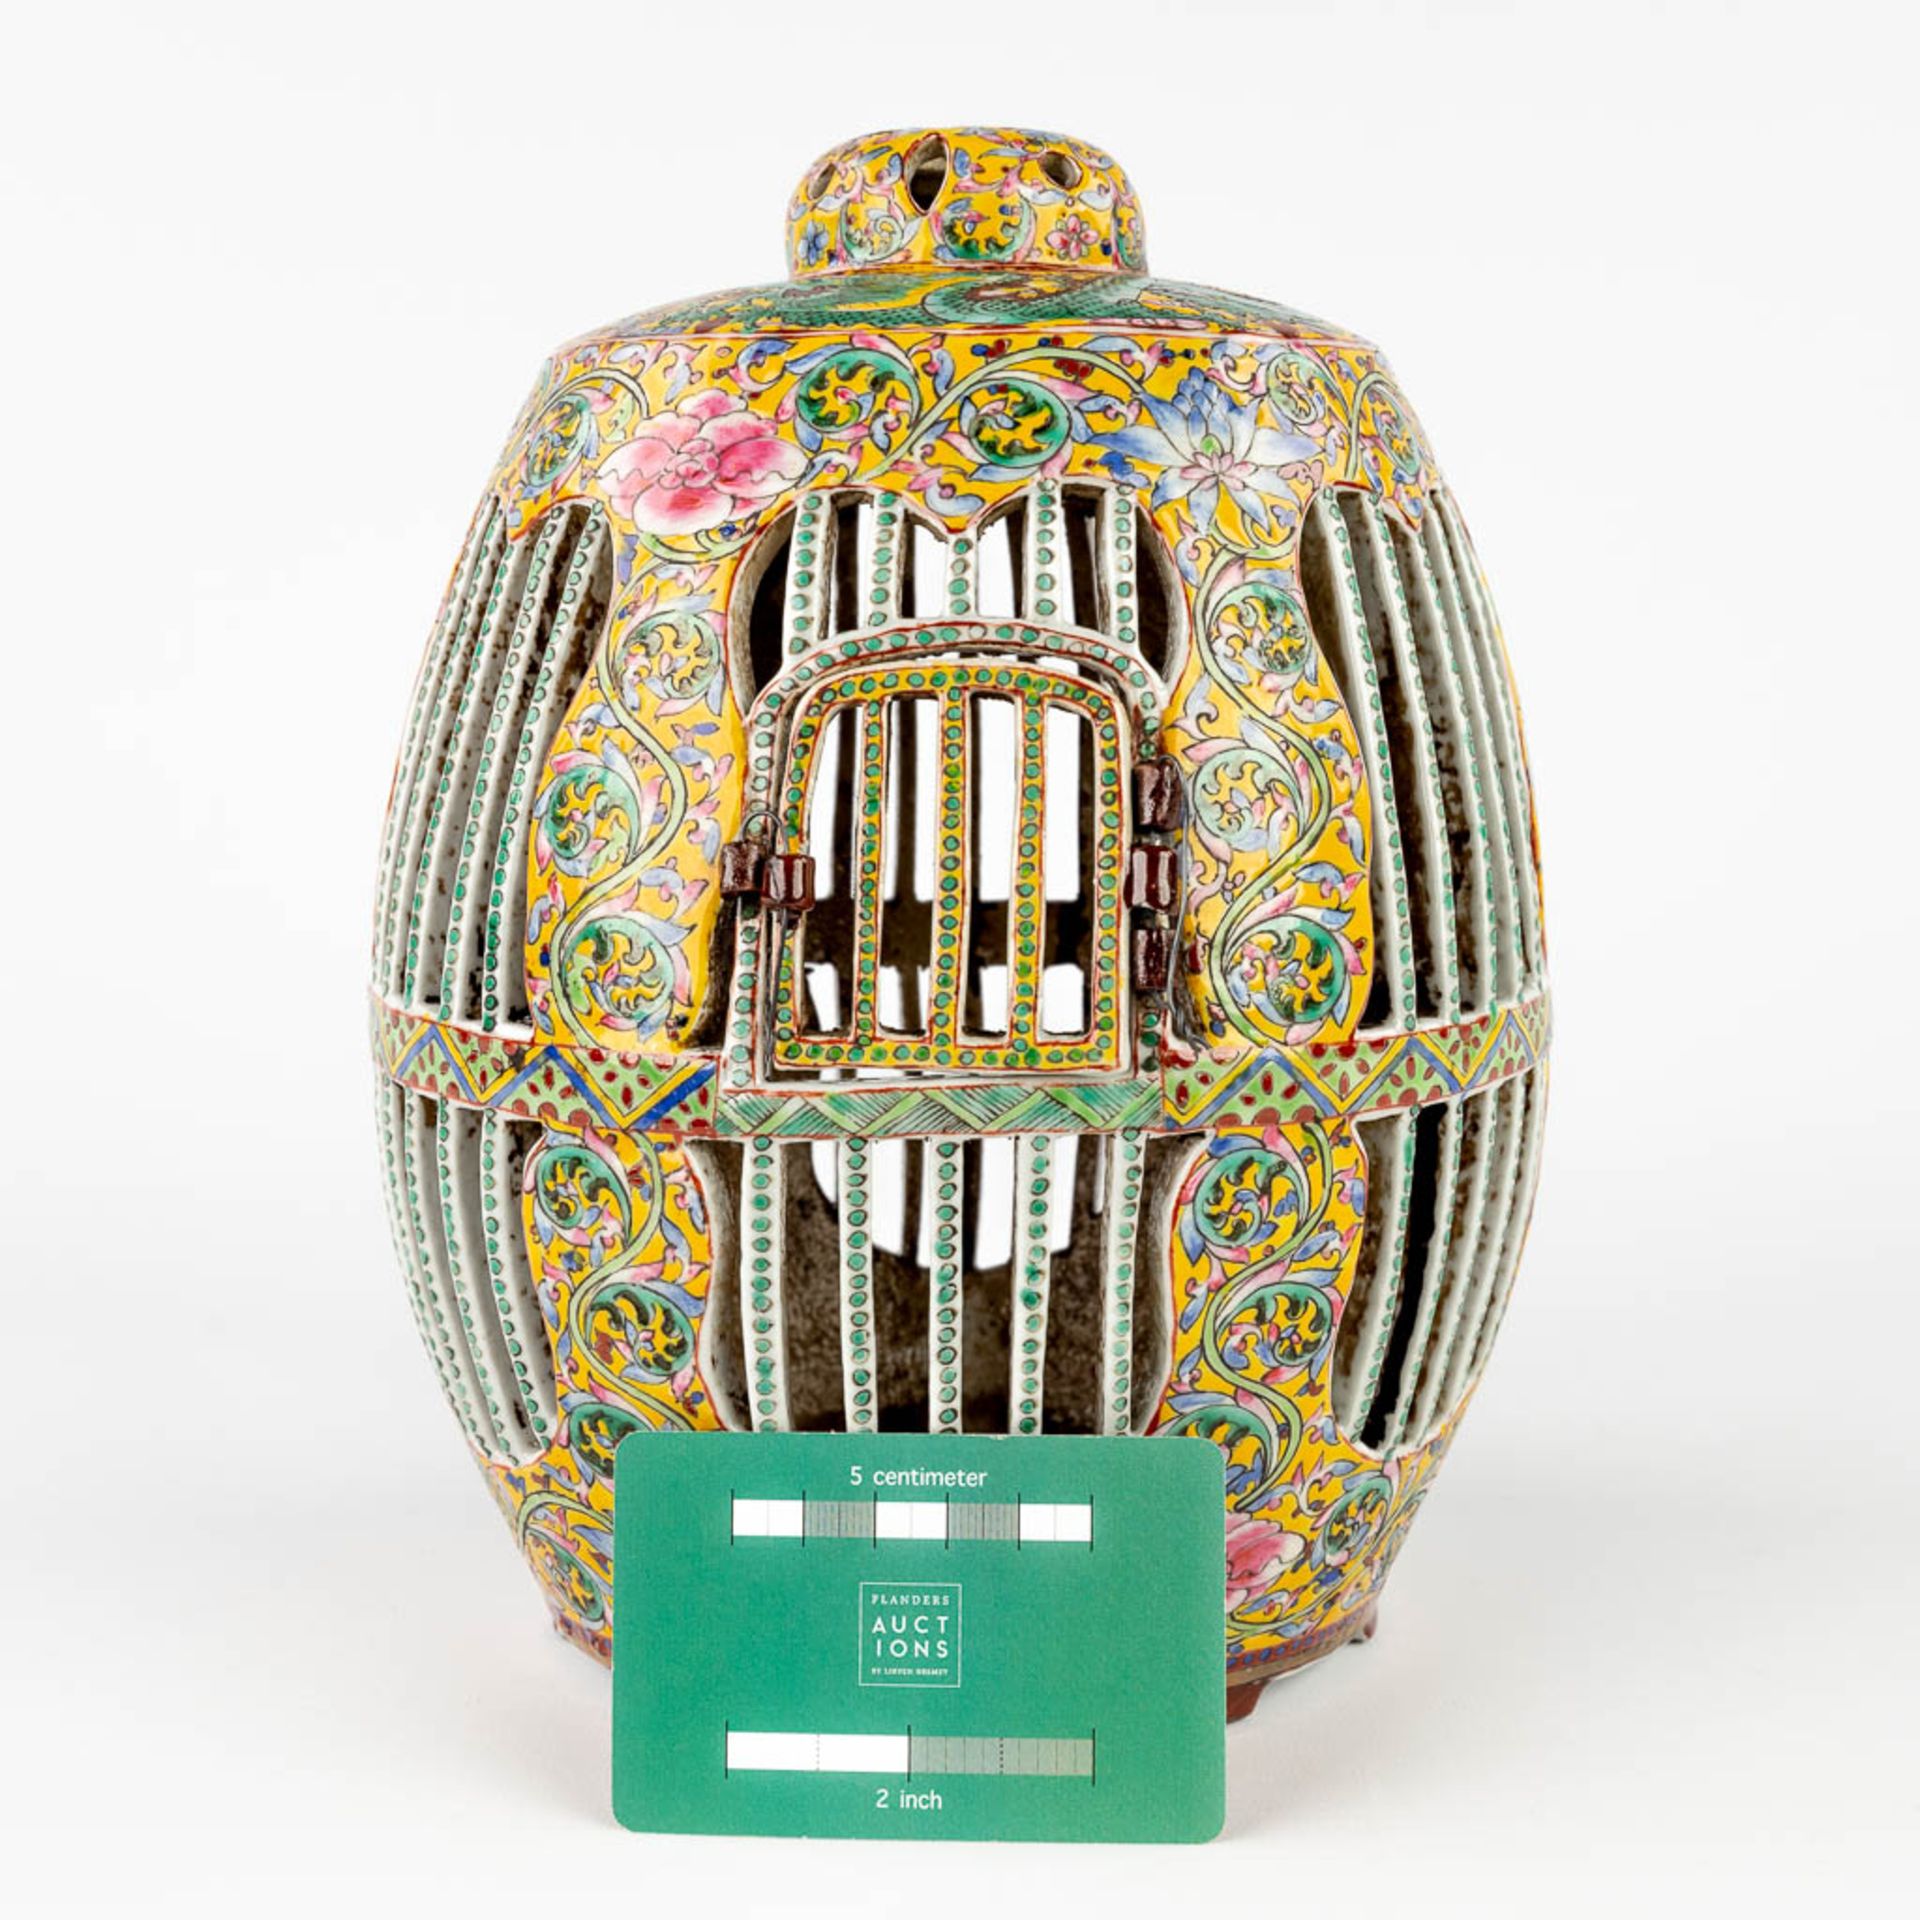 A Chinese porcelain 'Bird Cage', Famille Rose, Qianlong Mark. 20th C. (H:25 x D:19 cm) - Image 2 of 12